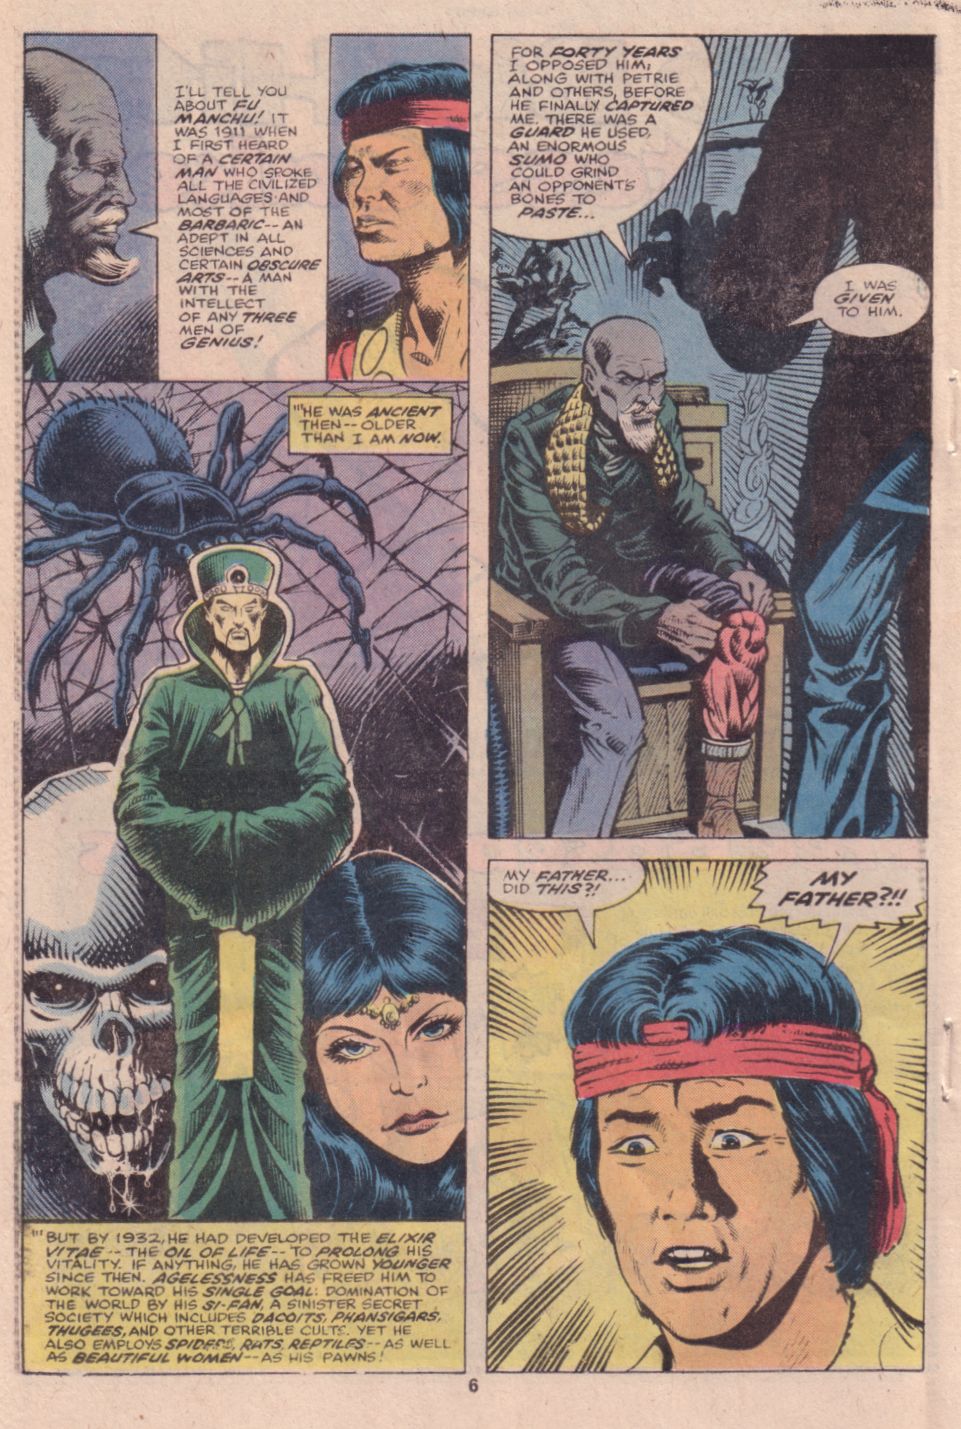 What If? (1977) issue 16 - Shang Chi Master of Kung Fu fought on The side of Fu Manchu - Page 5